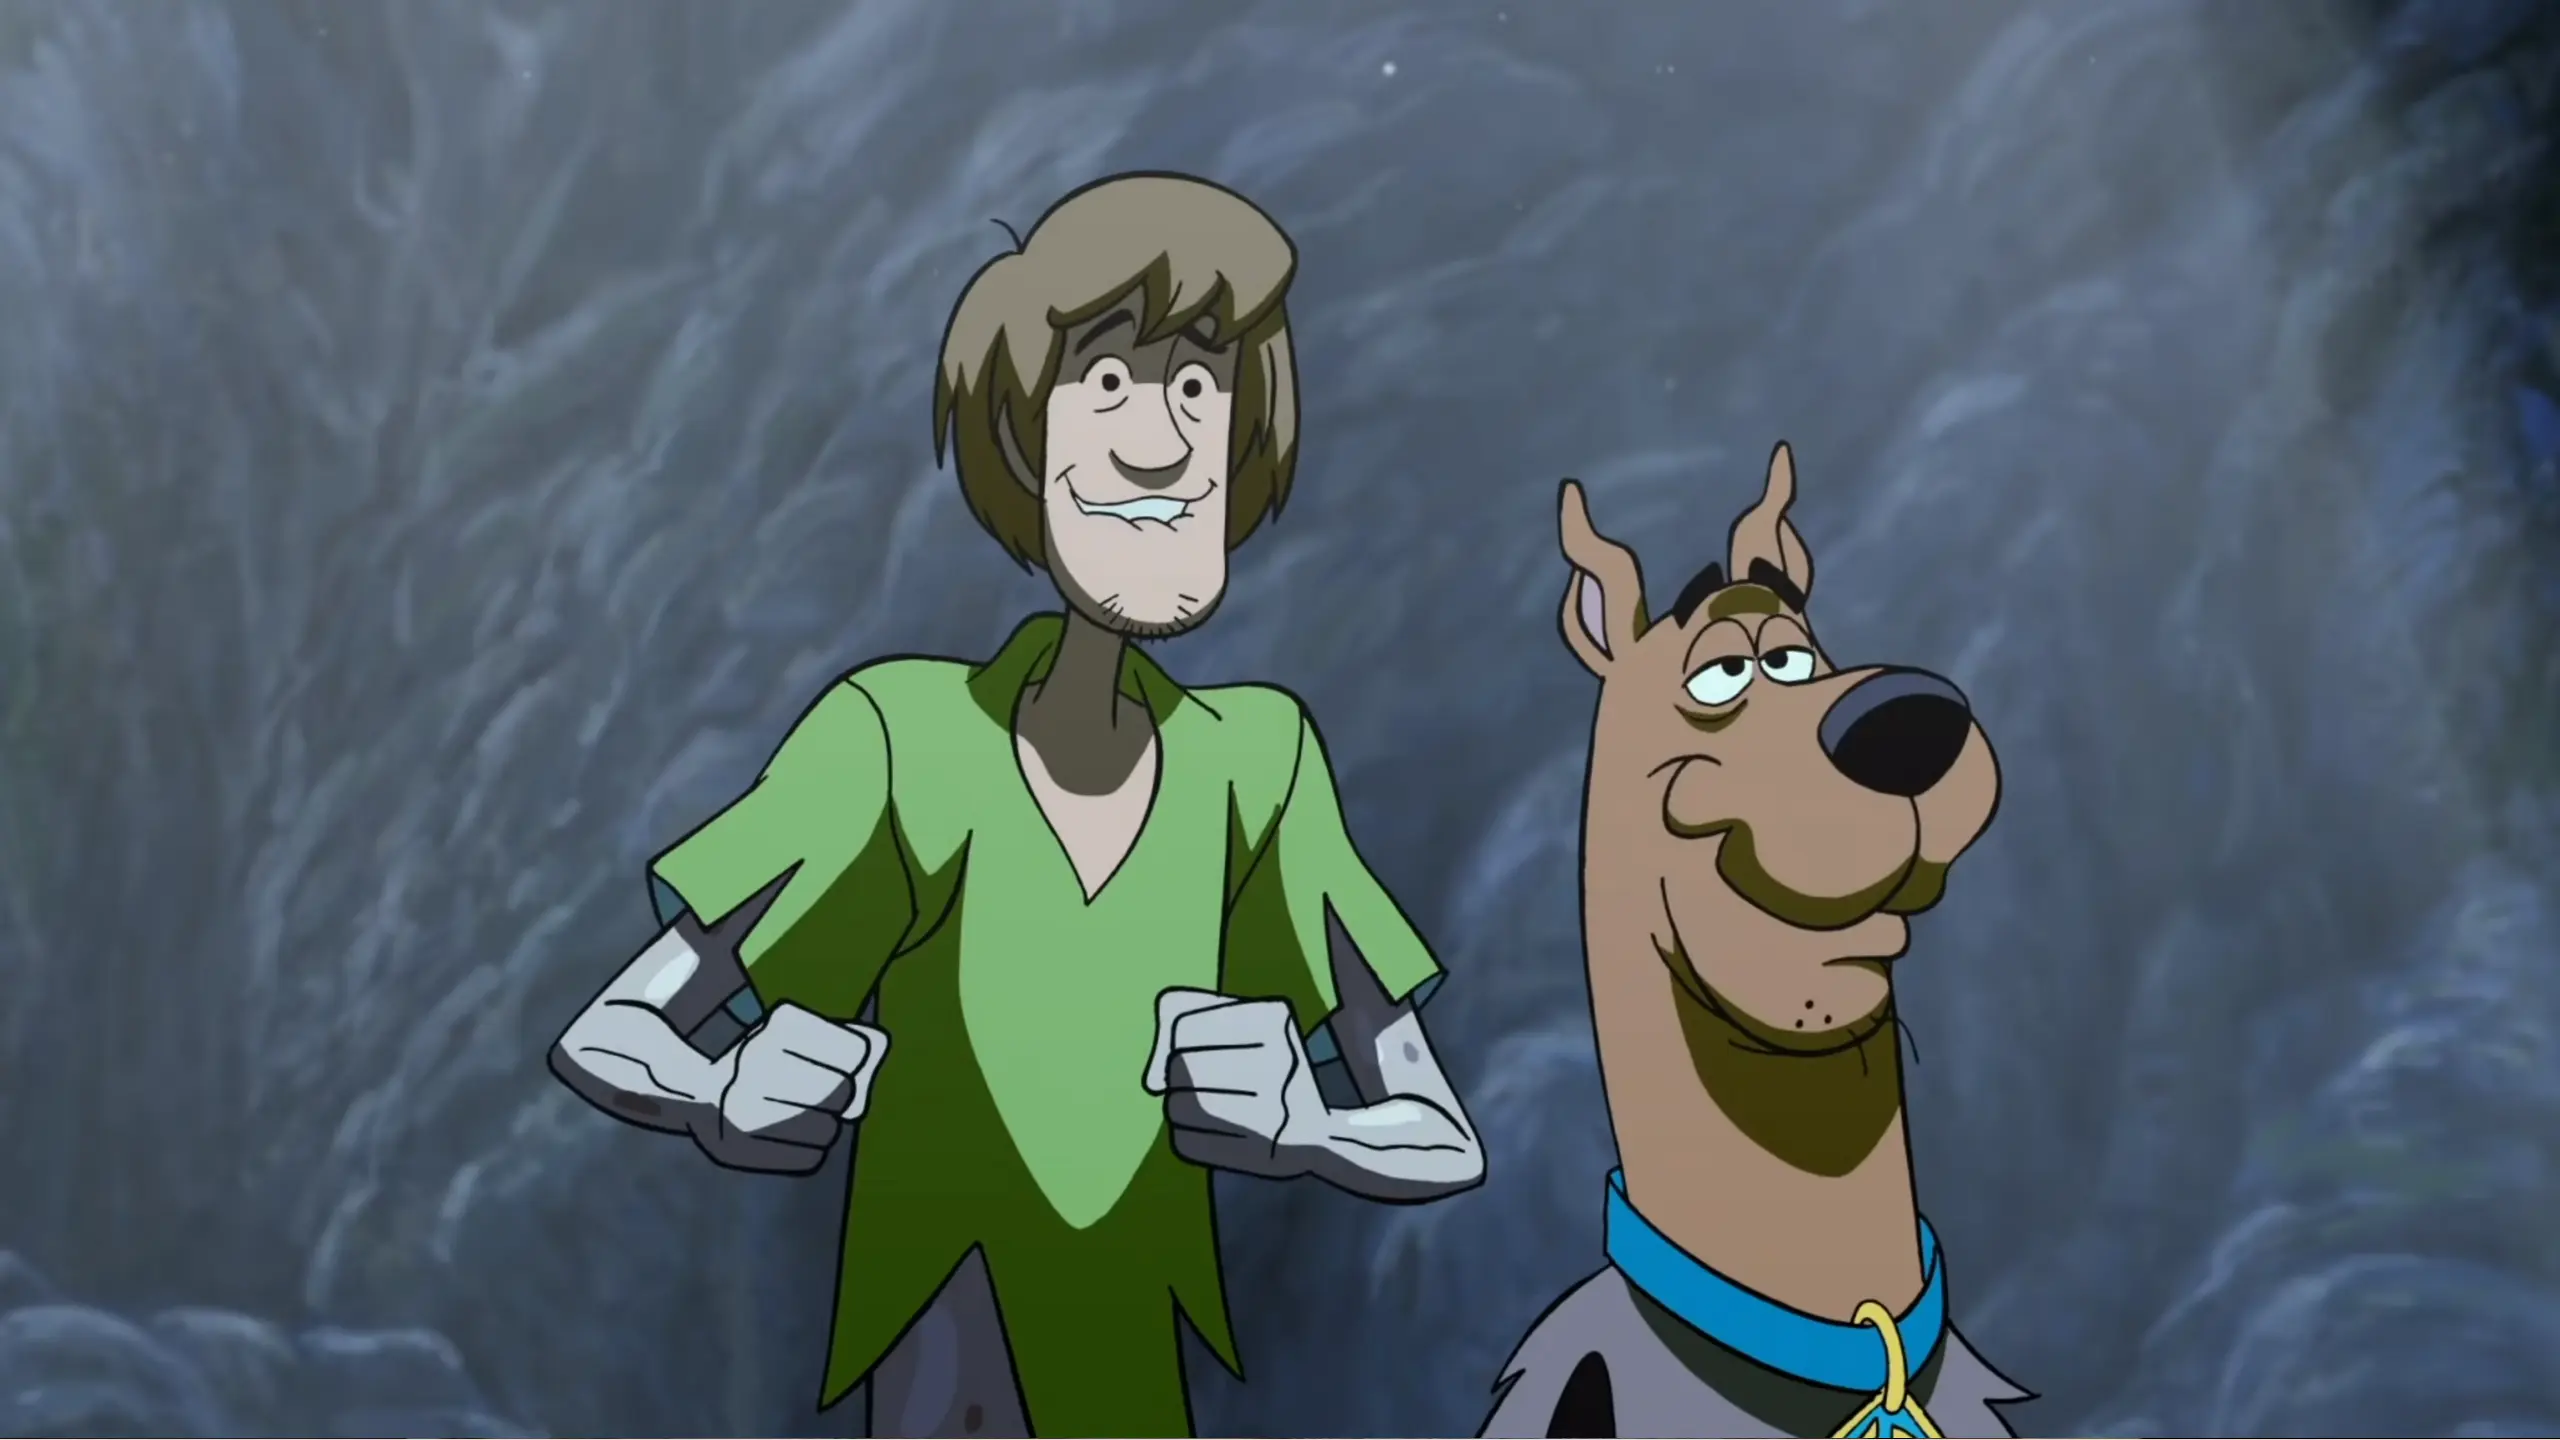 What Clothes Does Shaggy Wear